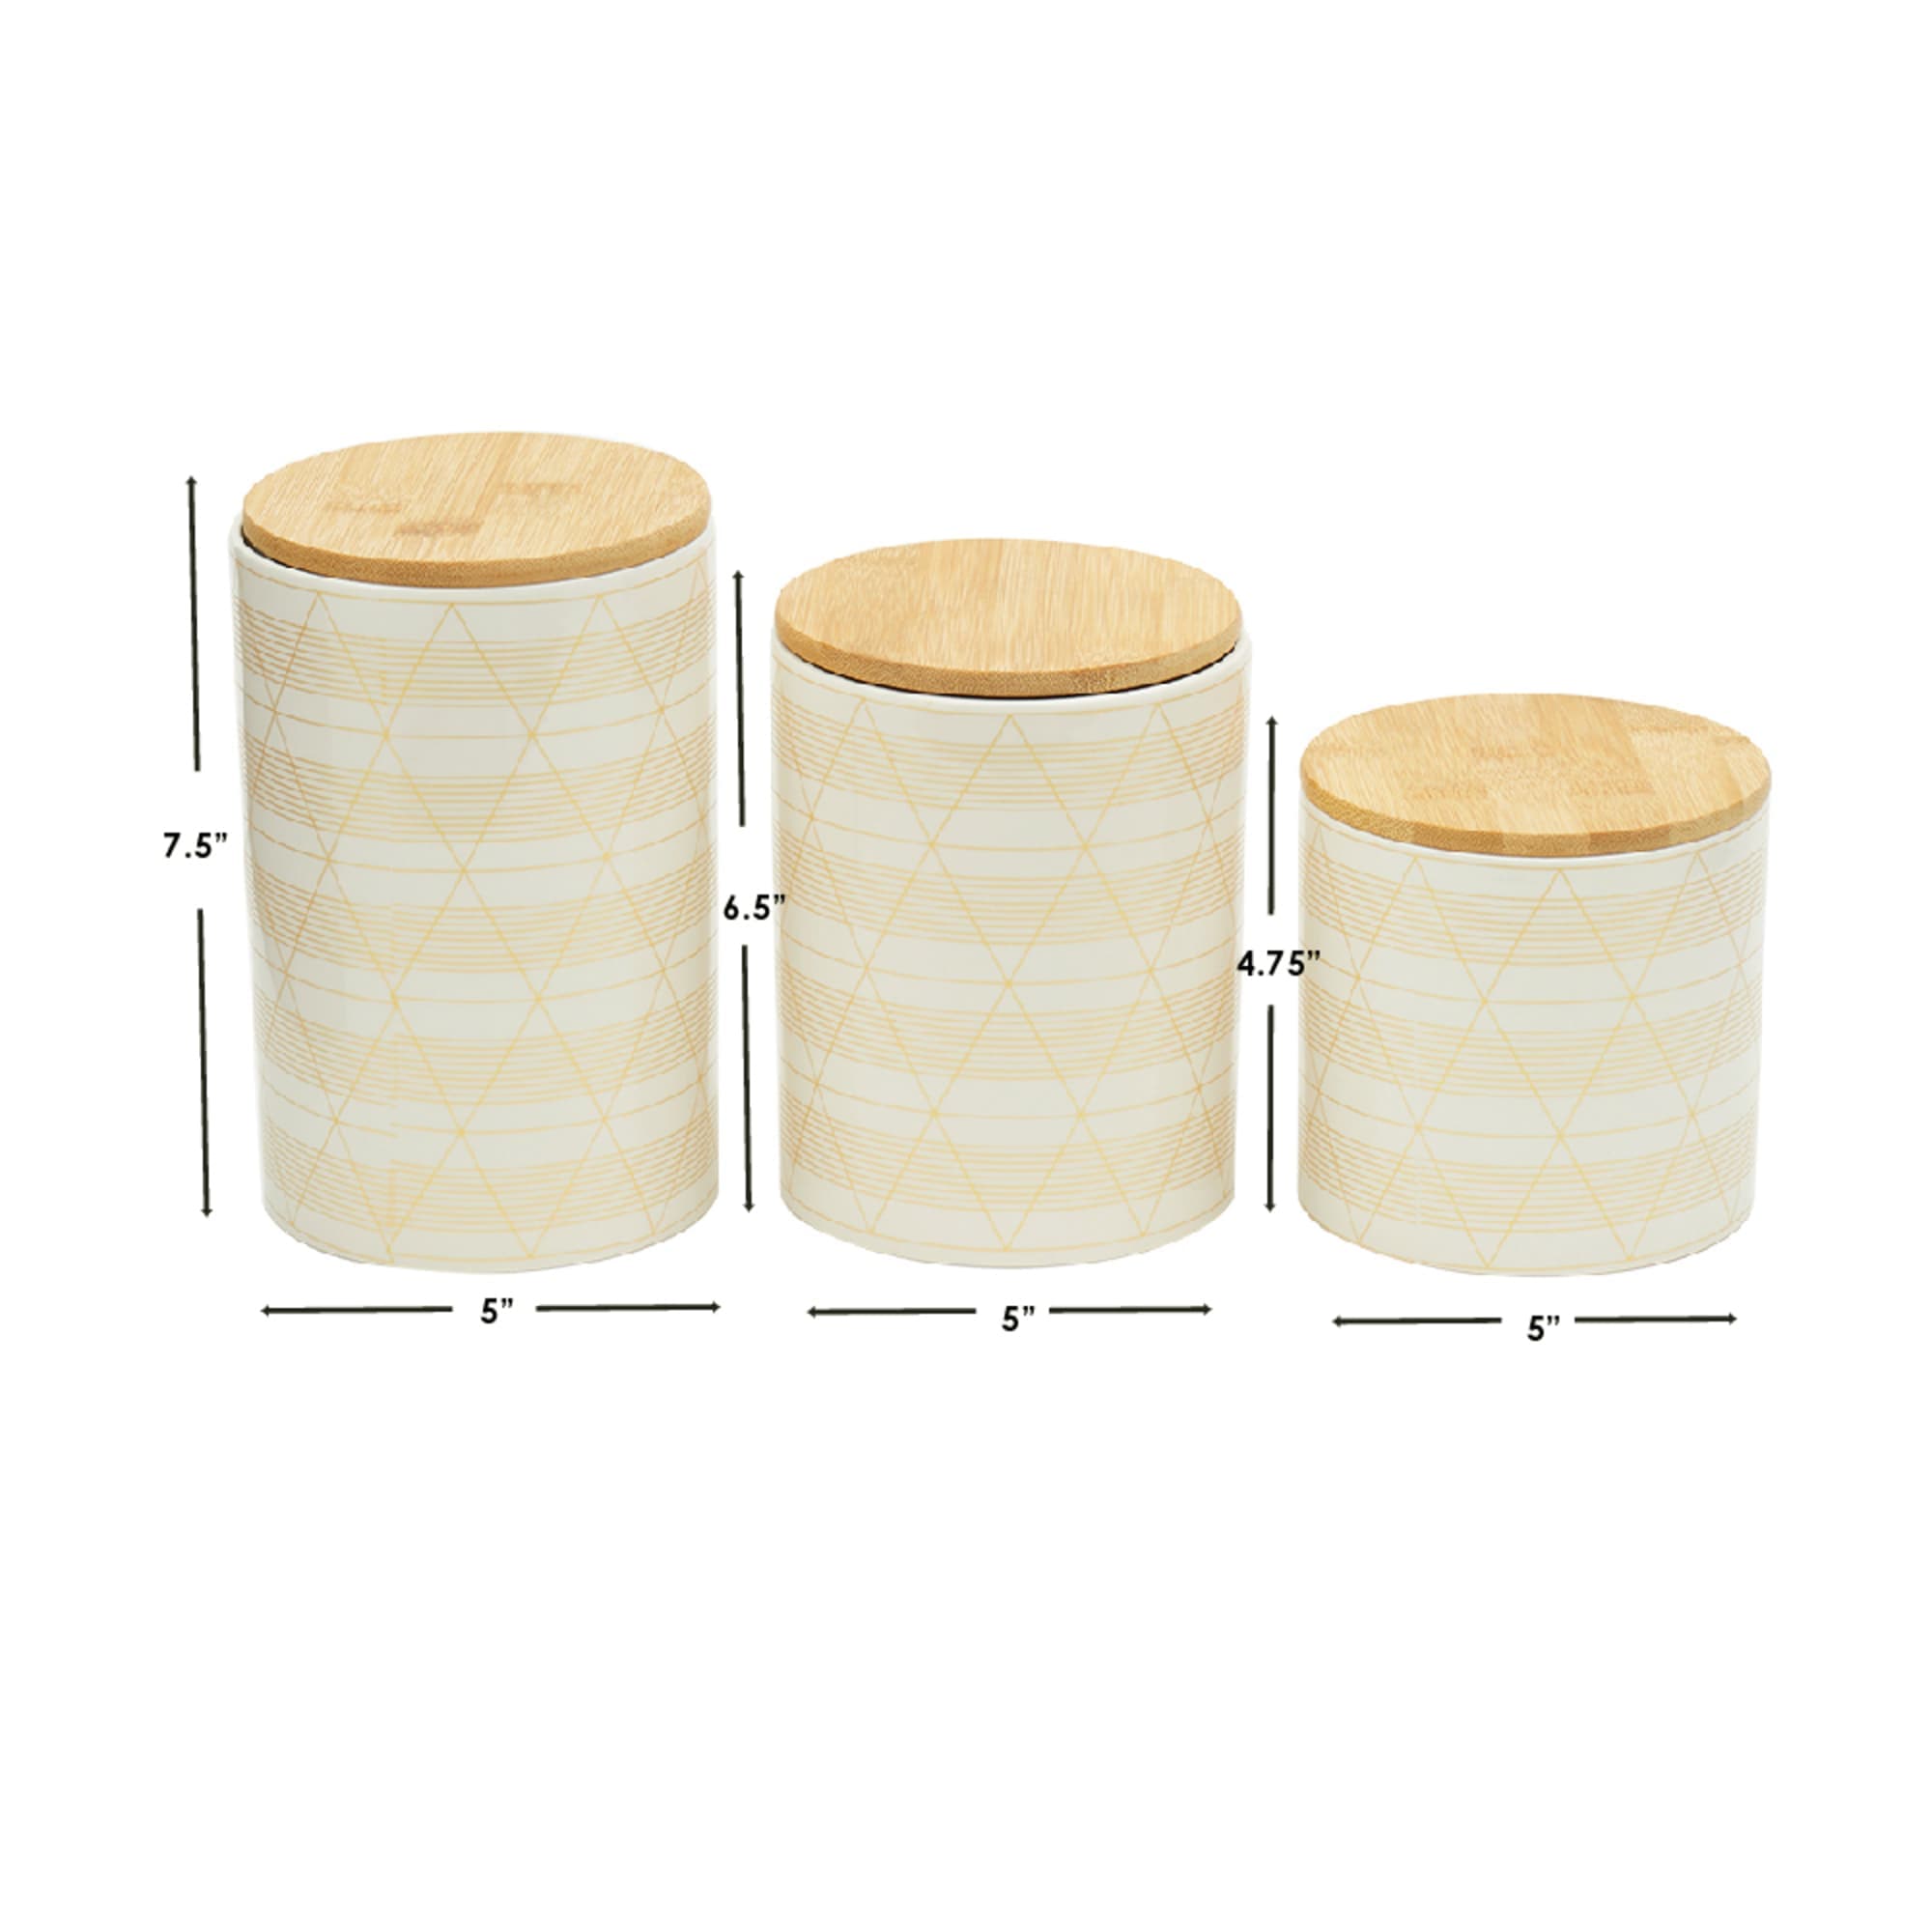 Home Basics Diamond Stripe 3 Piece Ceramic Canister Set with Bamboo Top, White $20.00 EACH, CASE PACK OF 3